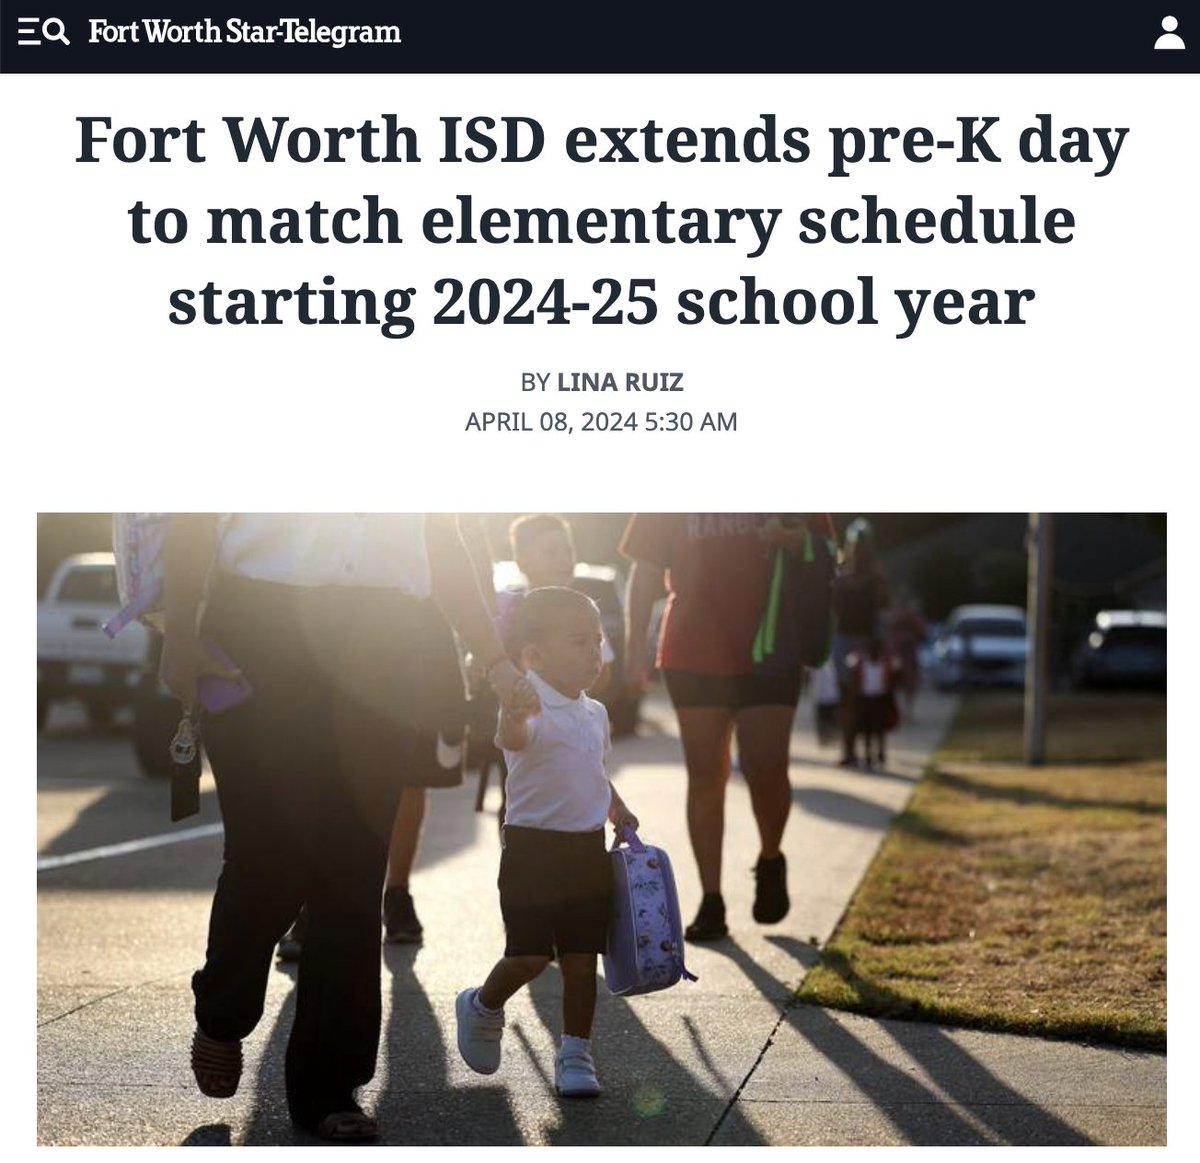 'Bethany Edwards, executive director of the Early Learning Alliance, applauded the schedule change, noting how the gap between the end of a child’s school day and the end of a parent’s work day is 'notoriously challenging for families.'' star-telegram.com/news/local/edu… #TXlege #TXed #ECE